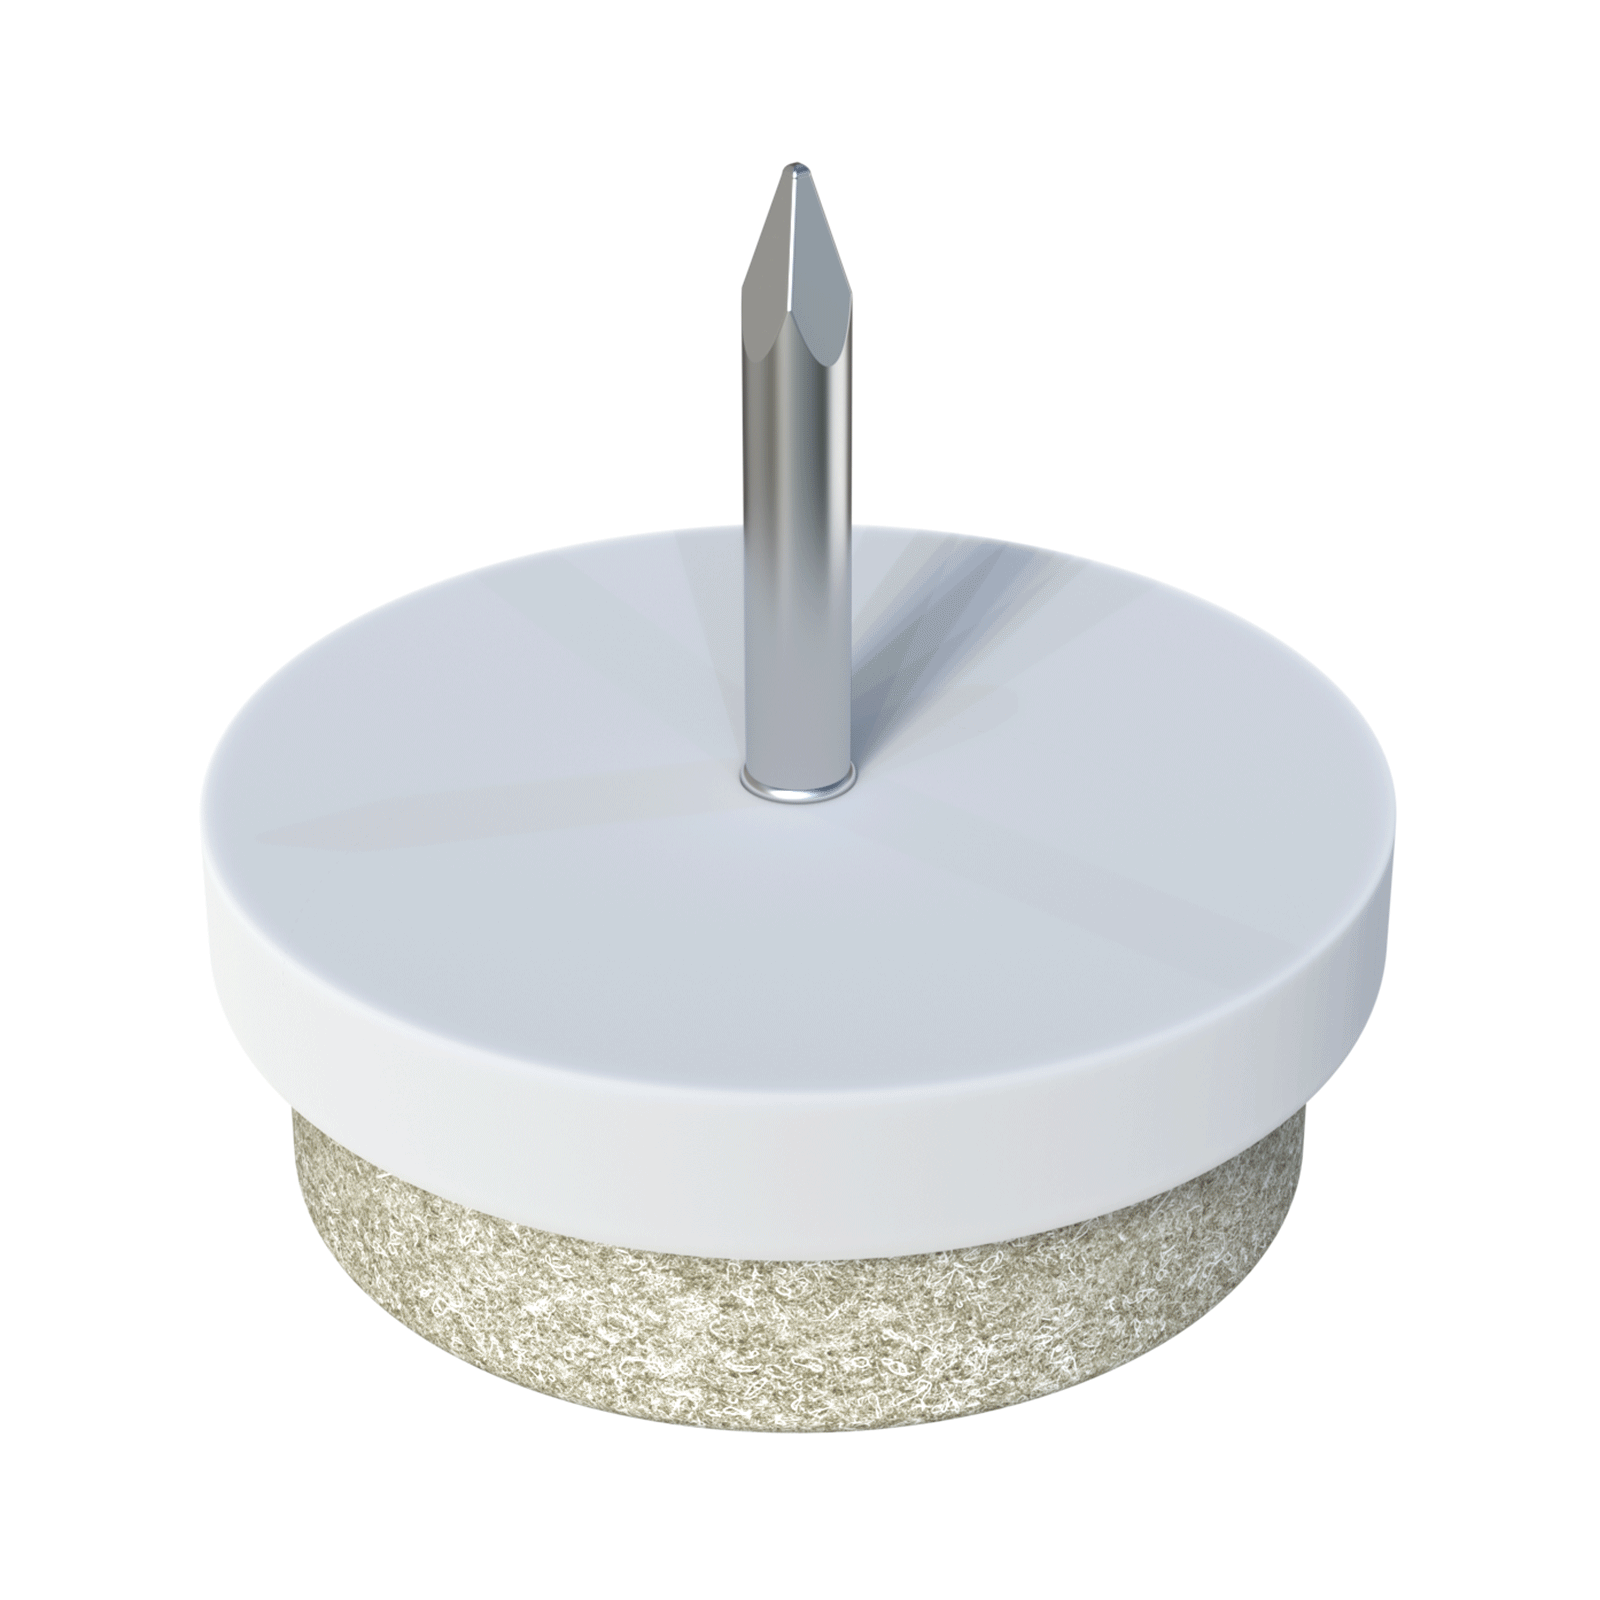 Our LQSB round nail and felt glide is ideal to be used on chairs and <b>protect the most delicate surfaces</b>. The felt is made of <i>top quality wool</i>, which significantly reduces the noise caused by the movement of the chair. The plastic body is made of polystyrene (PS). <br>
<br>
The hardness of the felt assures its <i>quality and sound-reducing effect</i> although we always recommend carrying out preliminary tests, for which you can ask for free samples.<br>